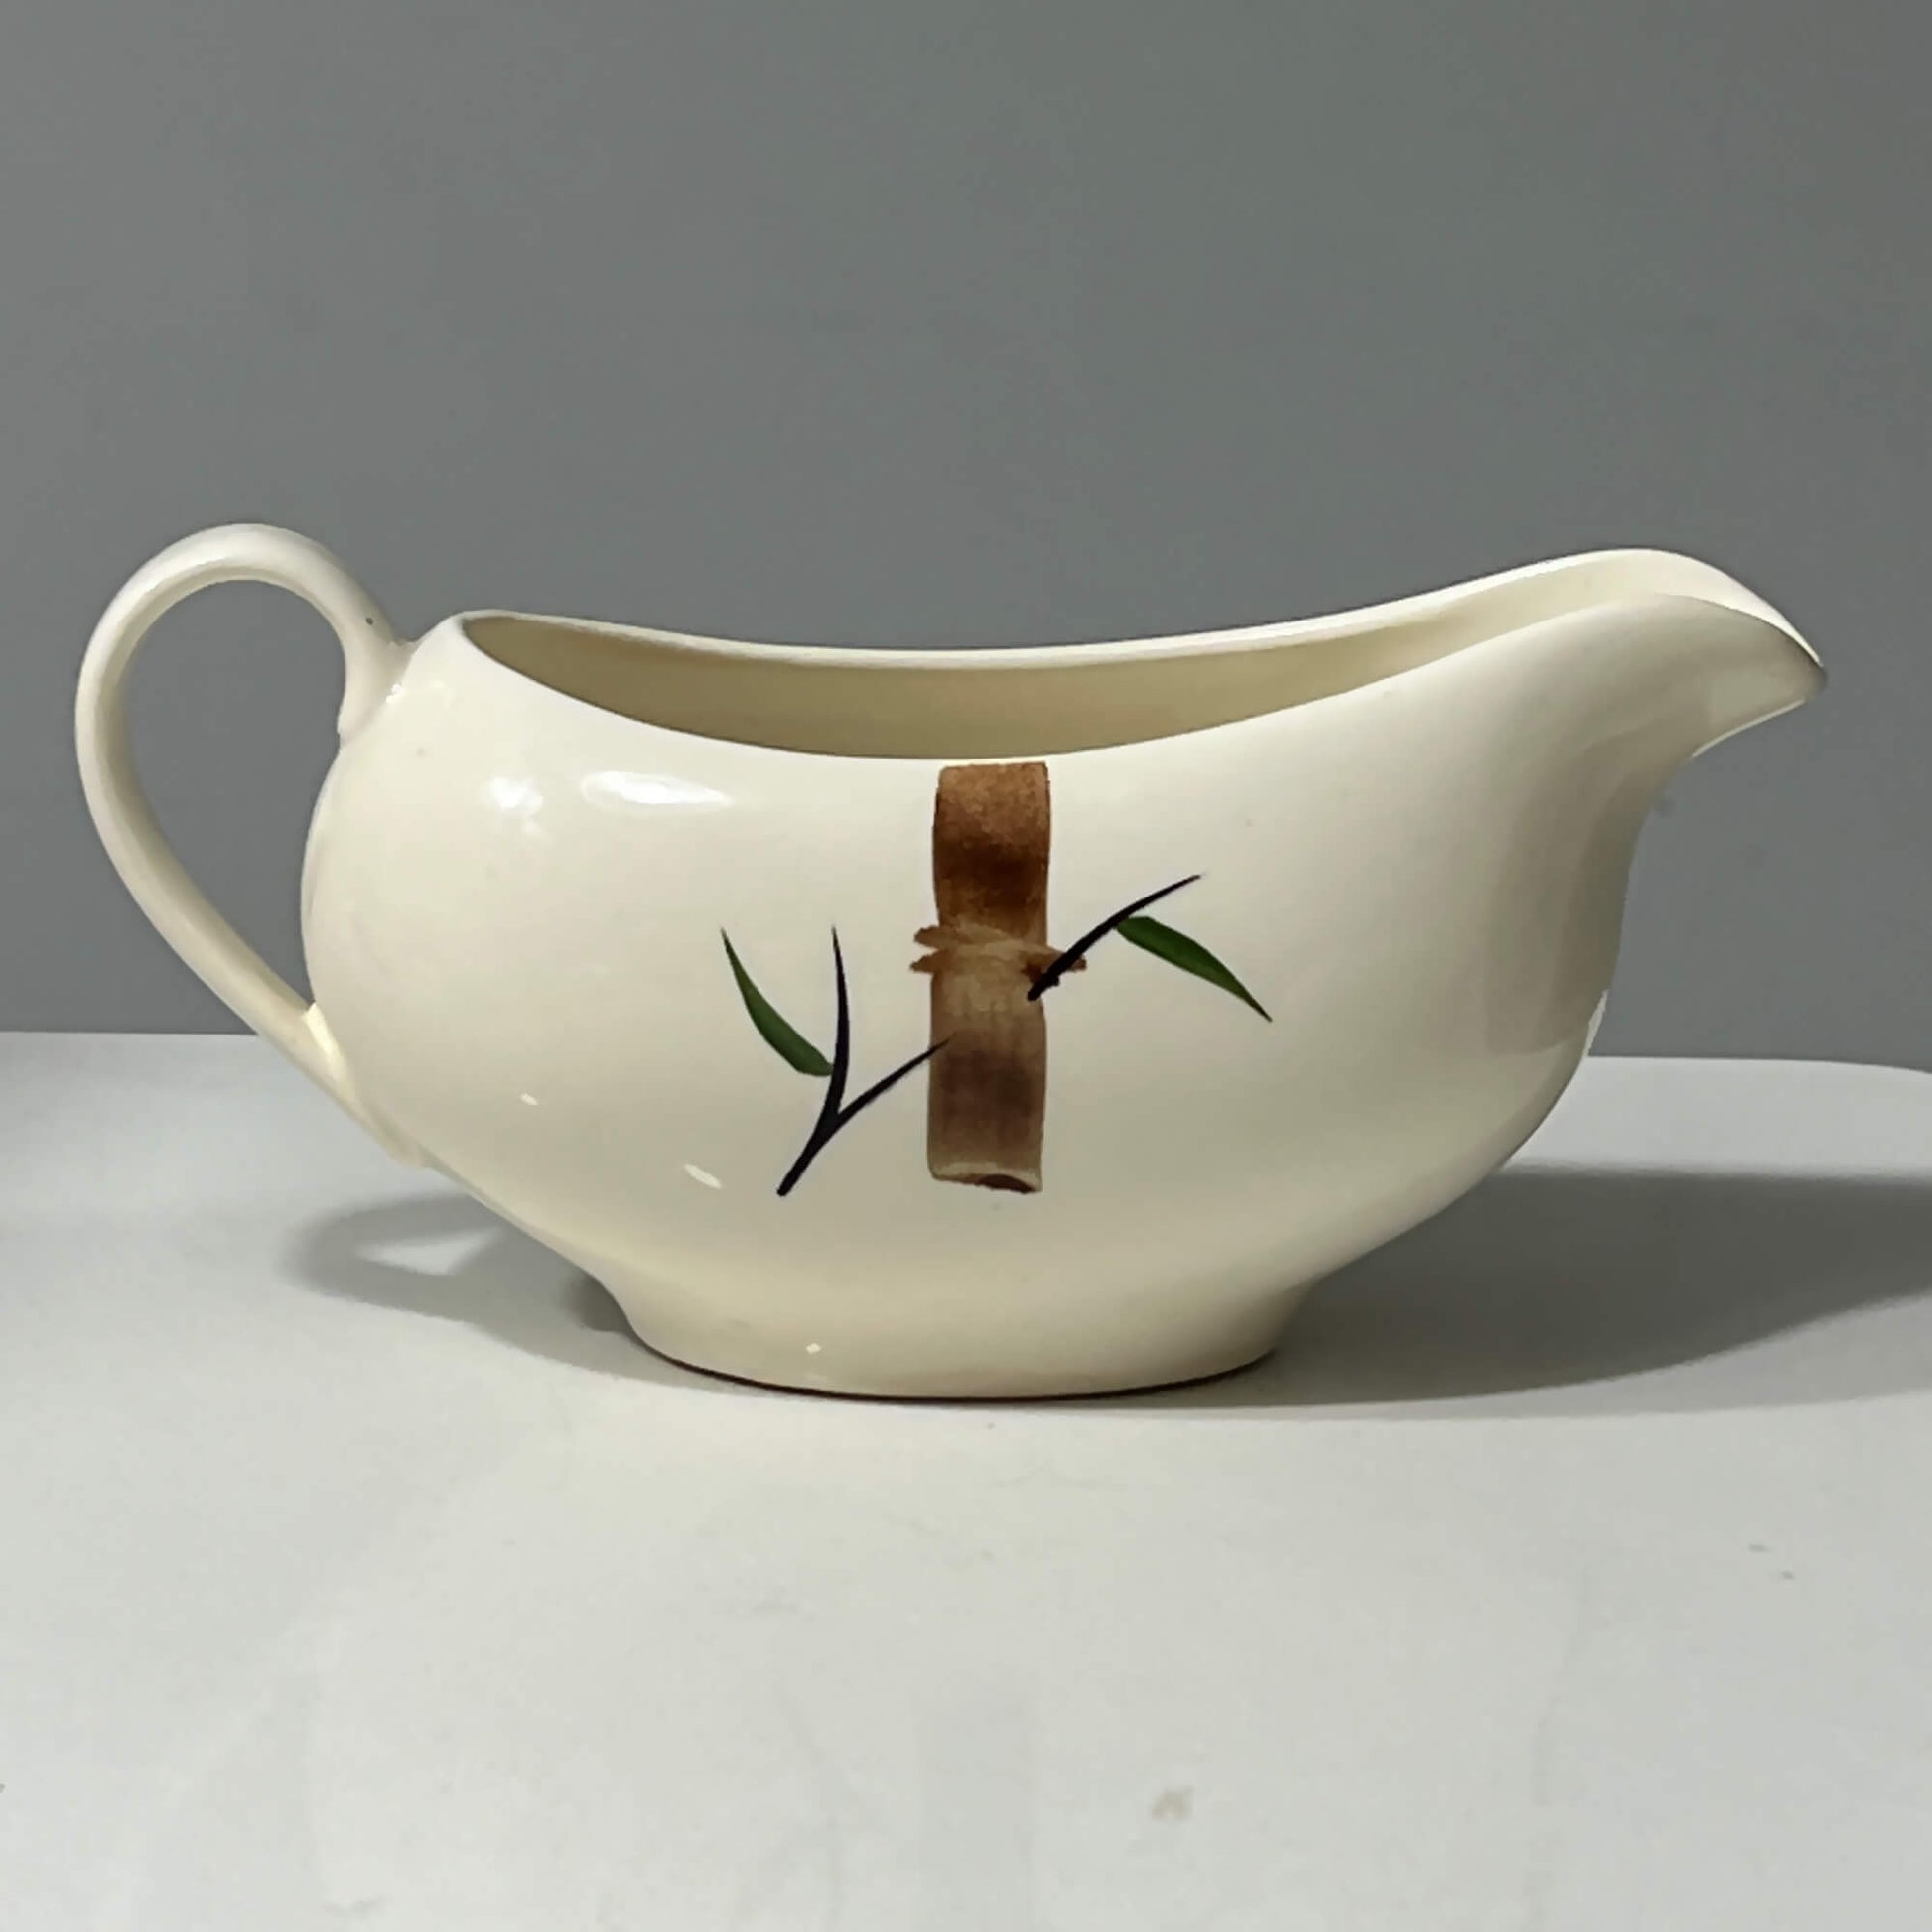 American-Heritage-China-Gravy-Boat-by-Stetson.-Bamboo-Pattern_Side-View-2.-Shop-eBargainsAndDeals.com